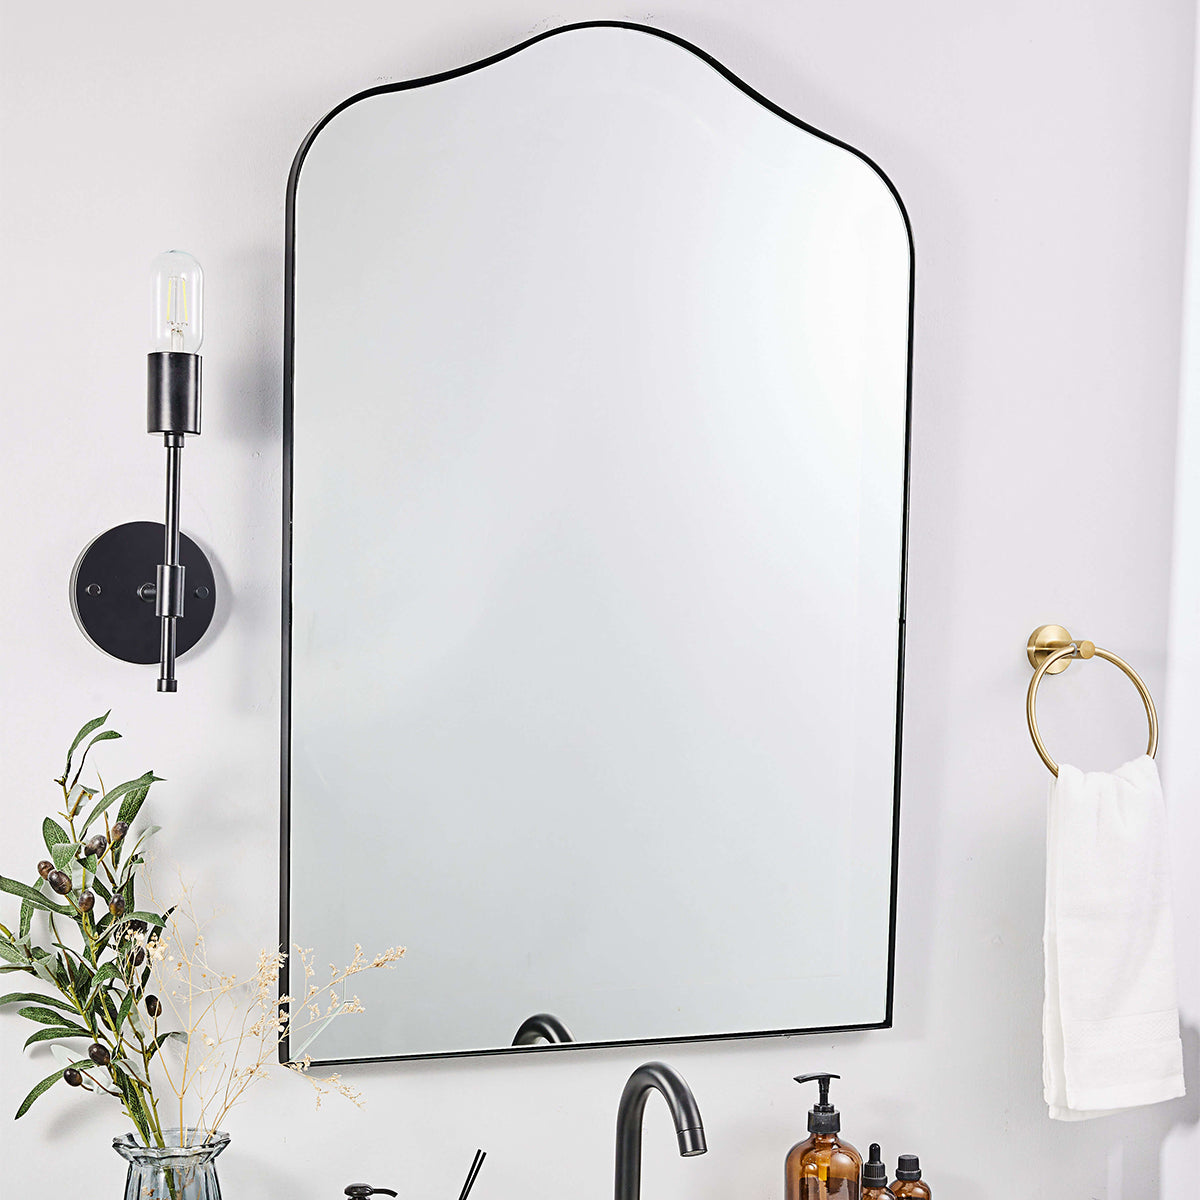 Modern Scalloped Decorative Arch Mirror for Bathroom / Wall | Stainless Steel Frame